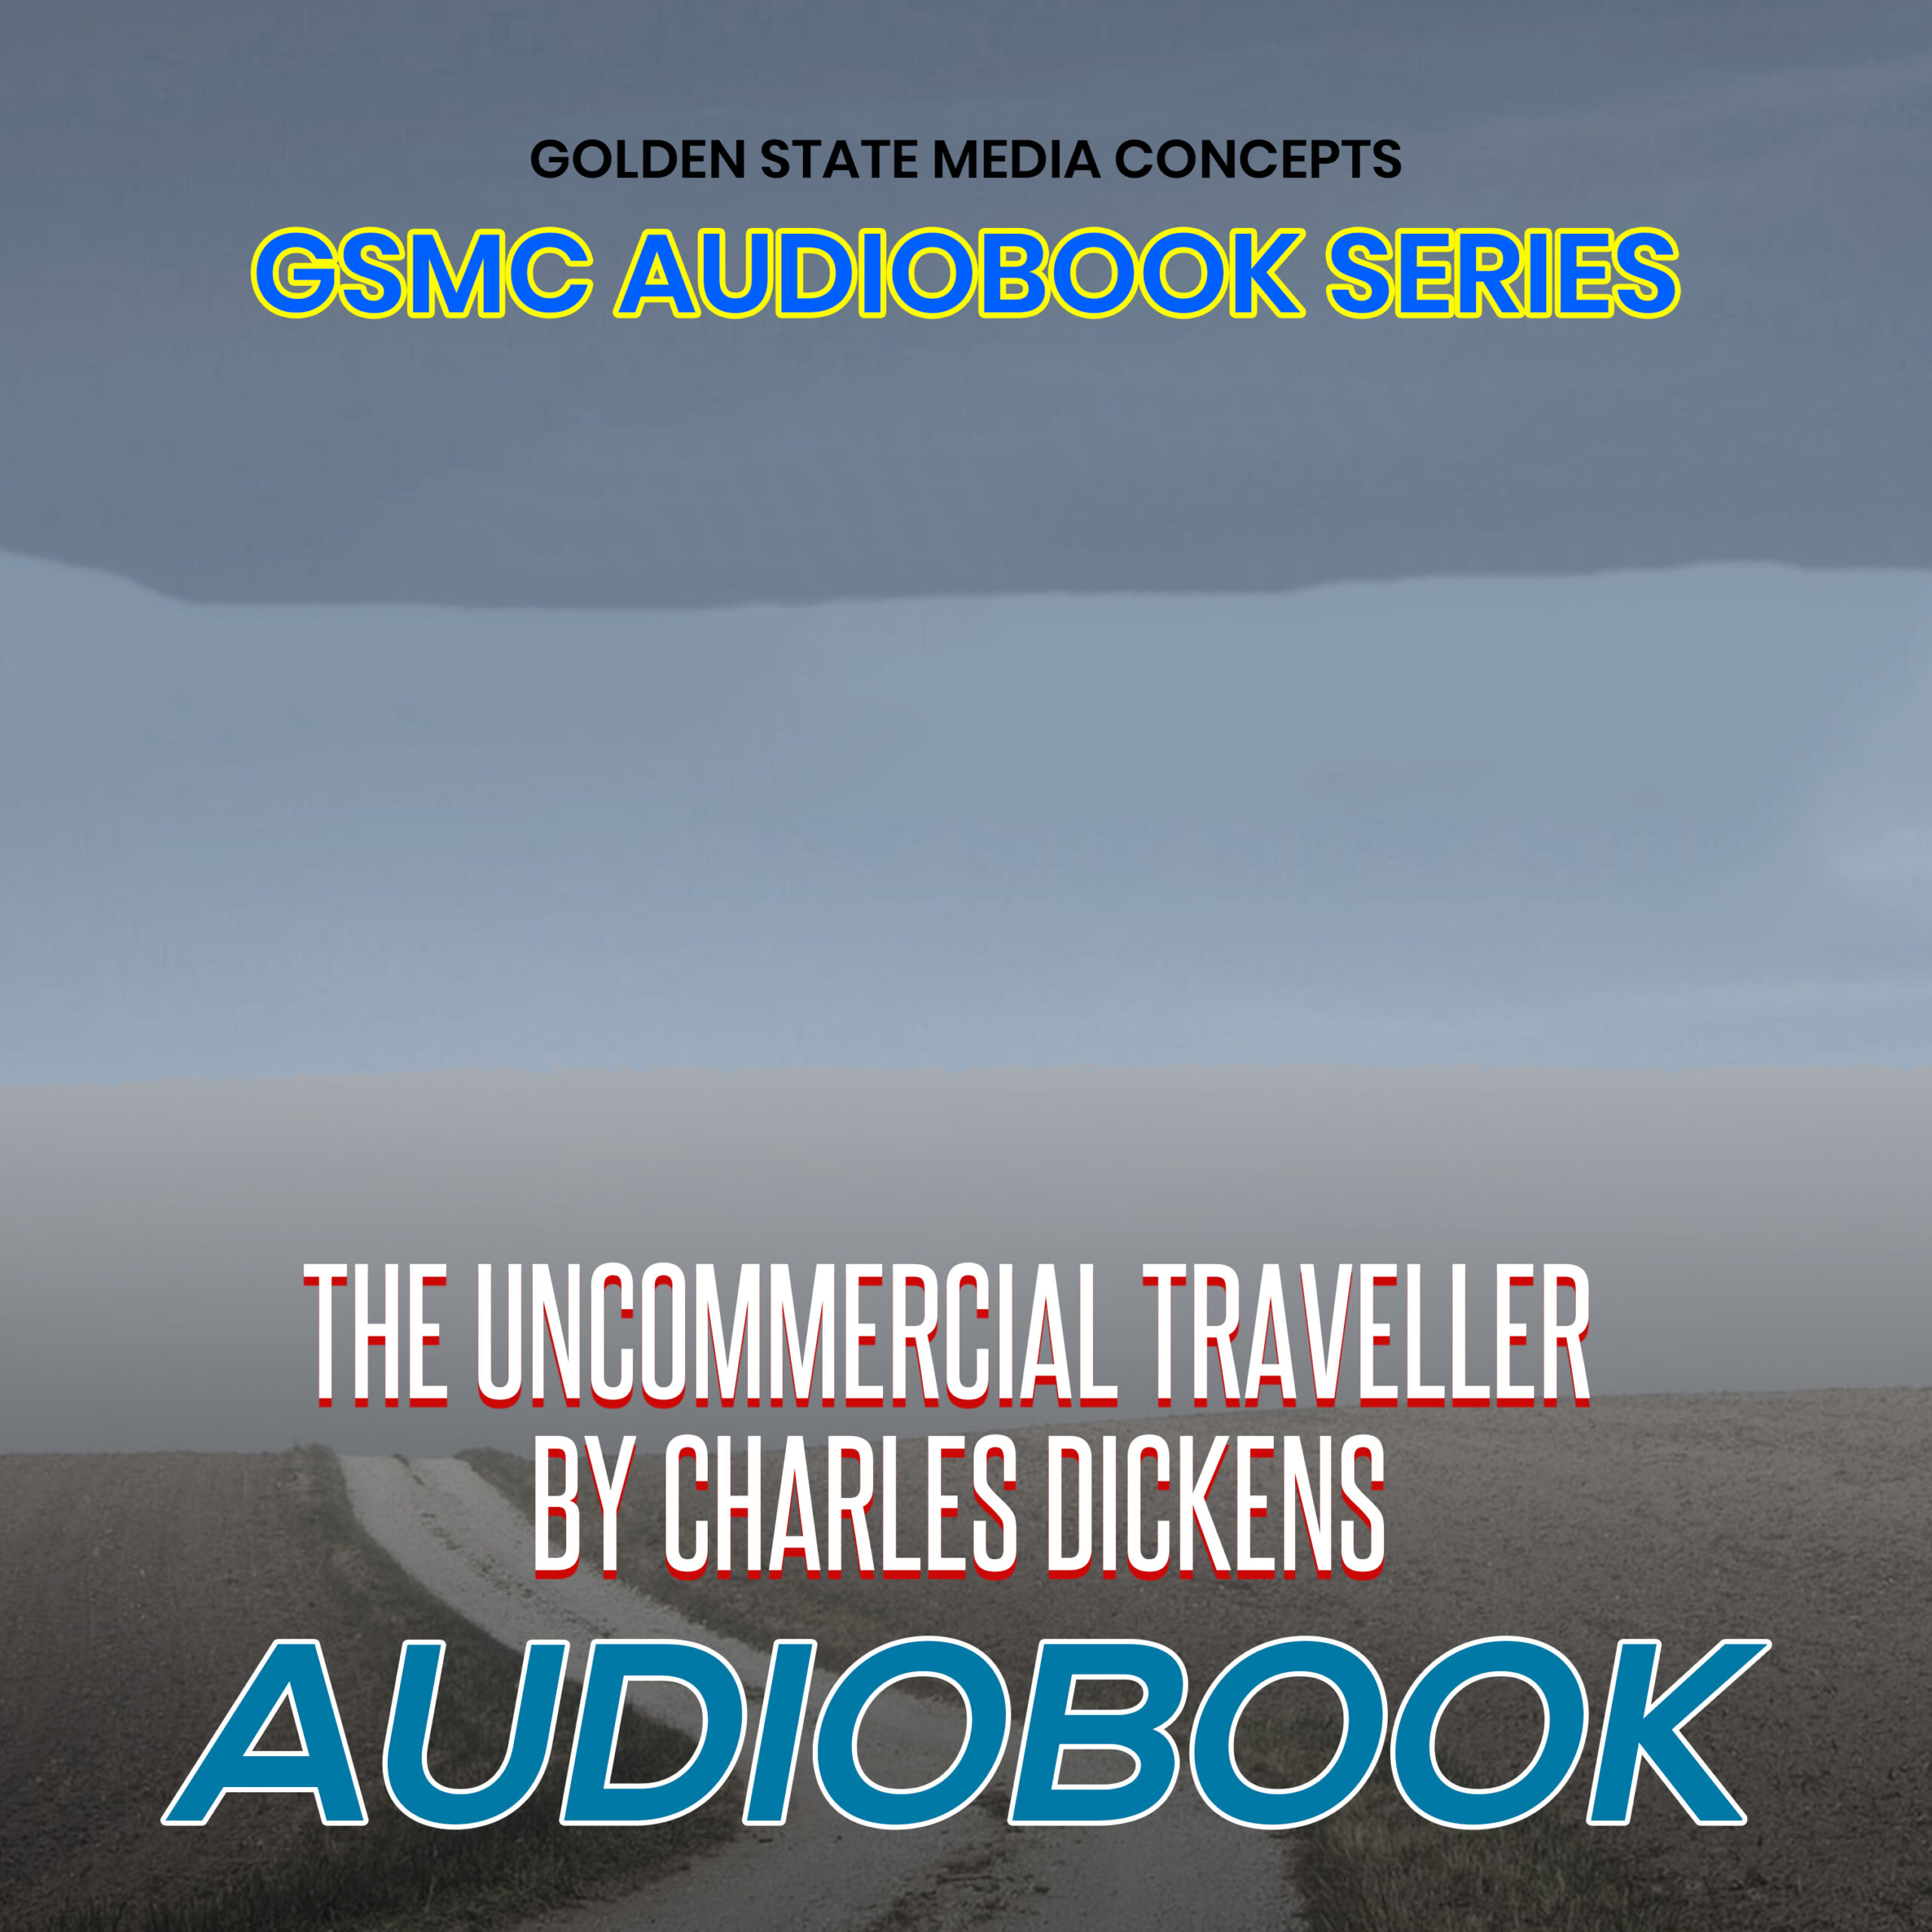 GSMC Audiobook Series: The Uncommercial Traveler by Charles Dickens